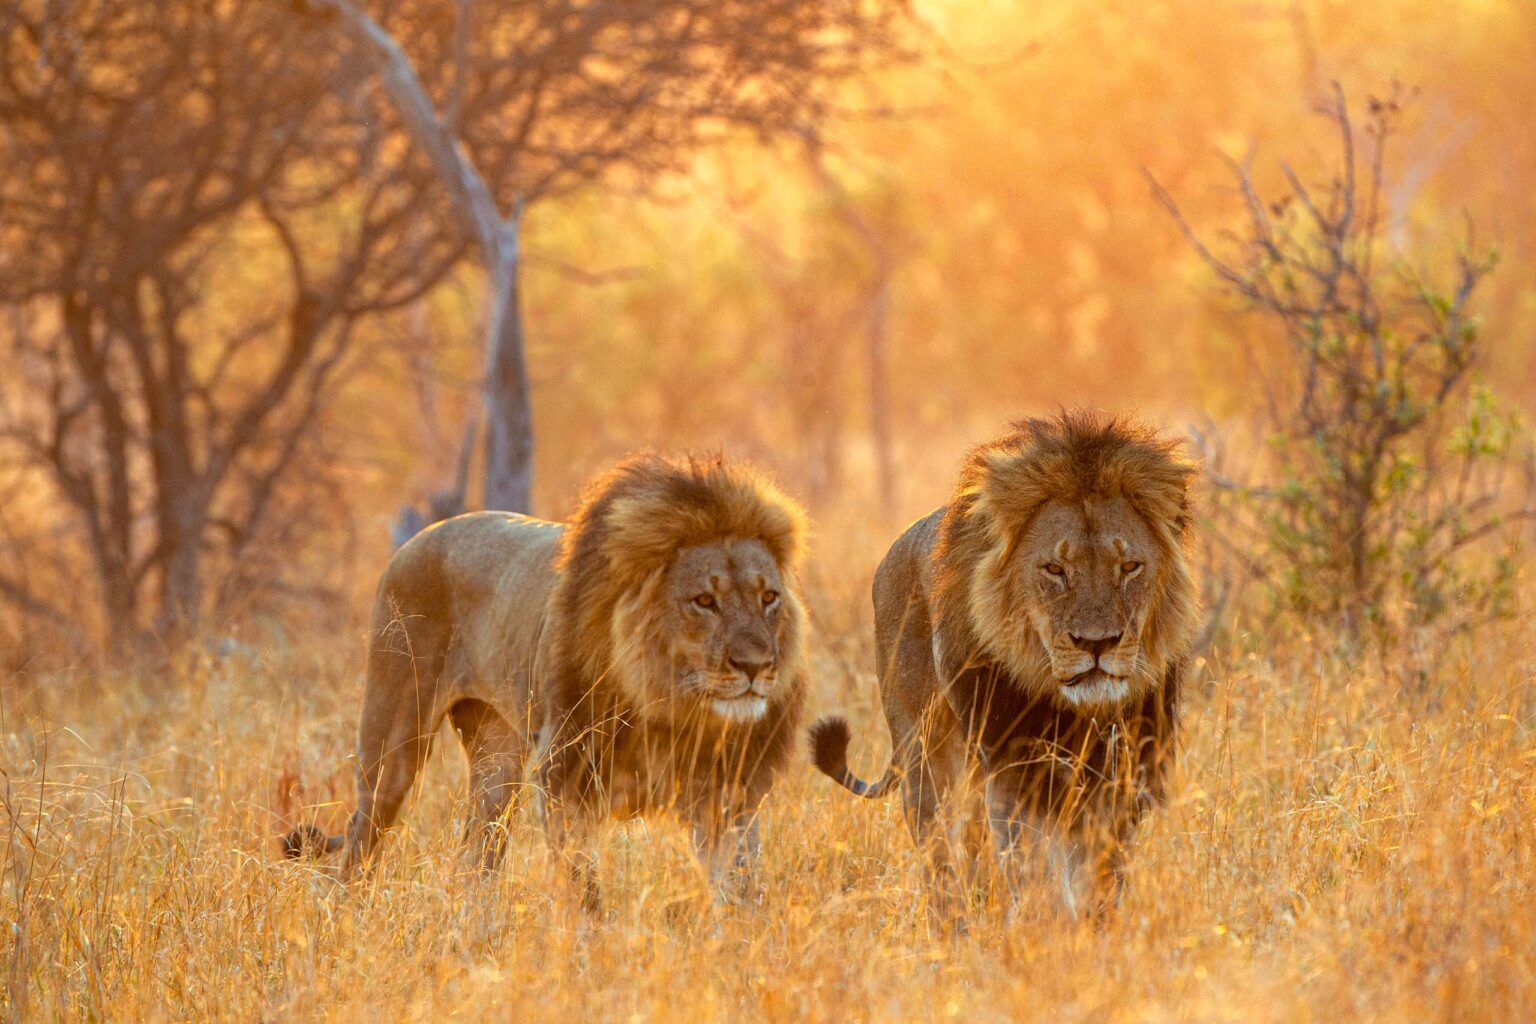 Two lions in the wild in Zimbabwe.